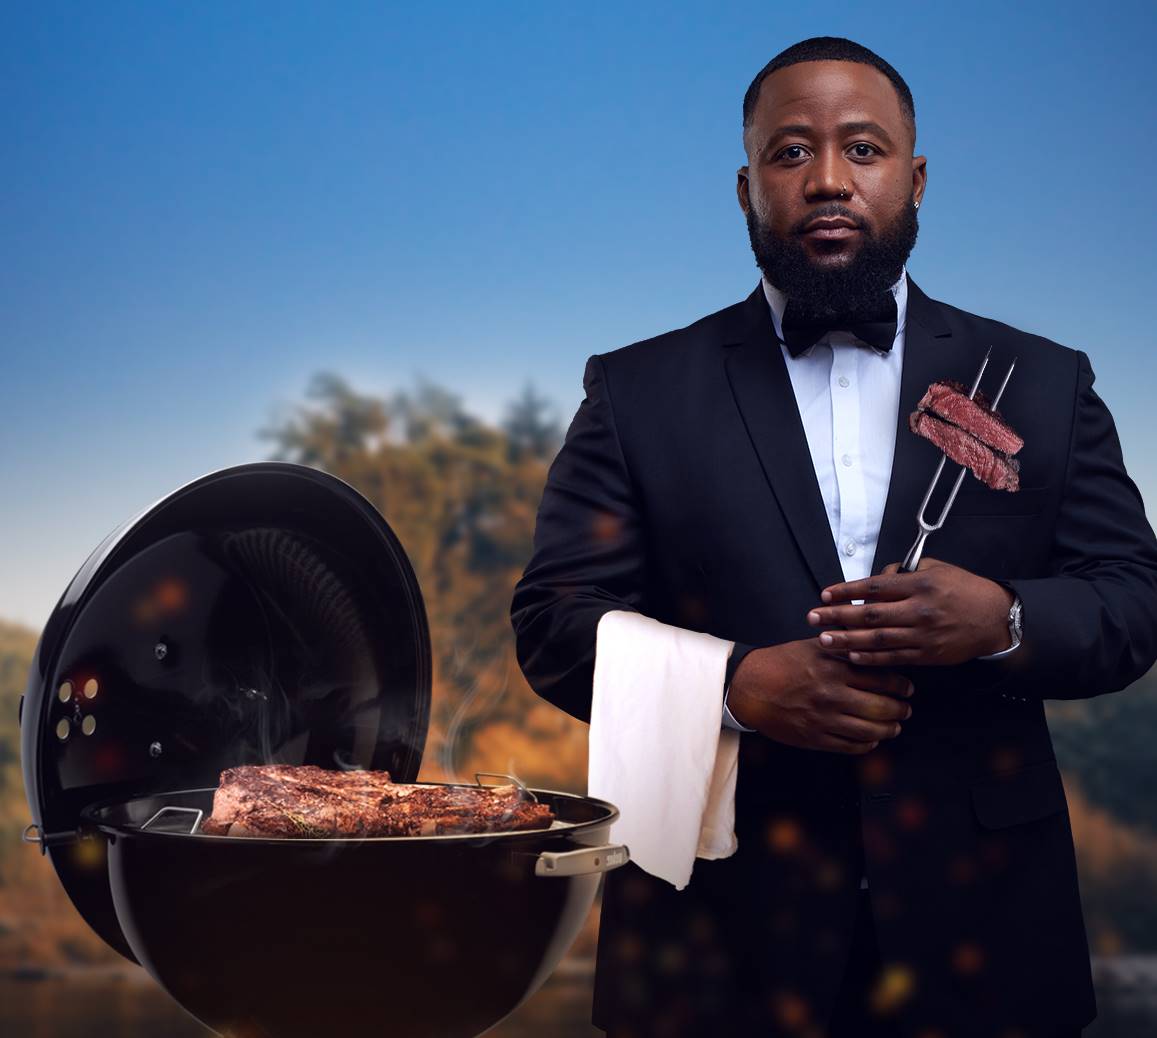 Cassper Nyovest takes AKA’s spot, but he needs a little polishing – as does the show. Photo: Supplied